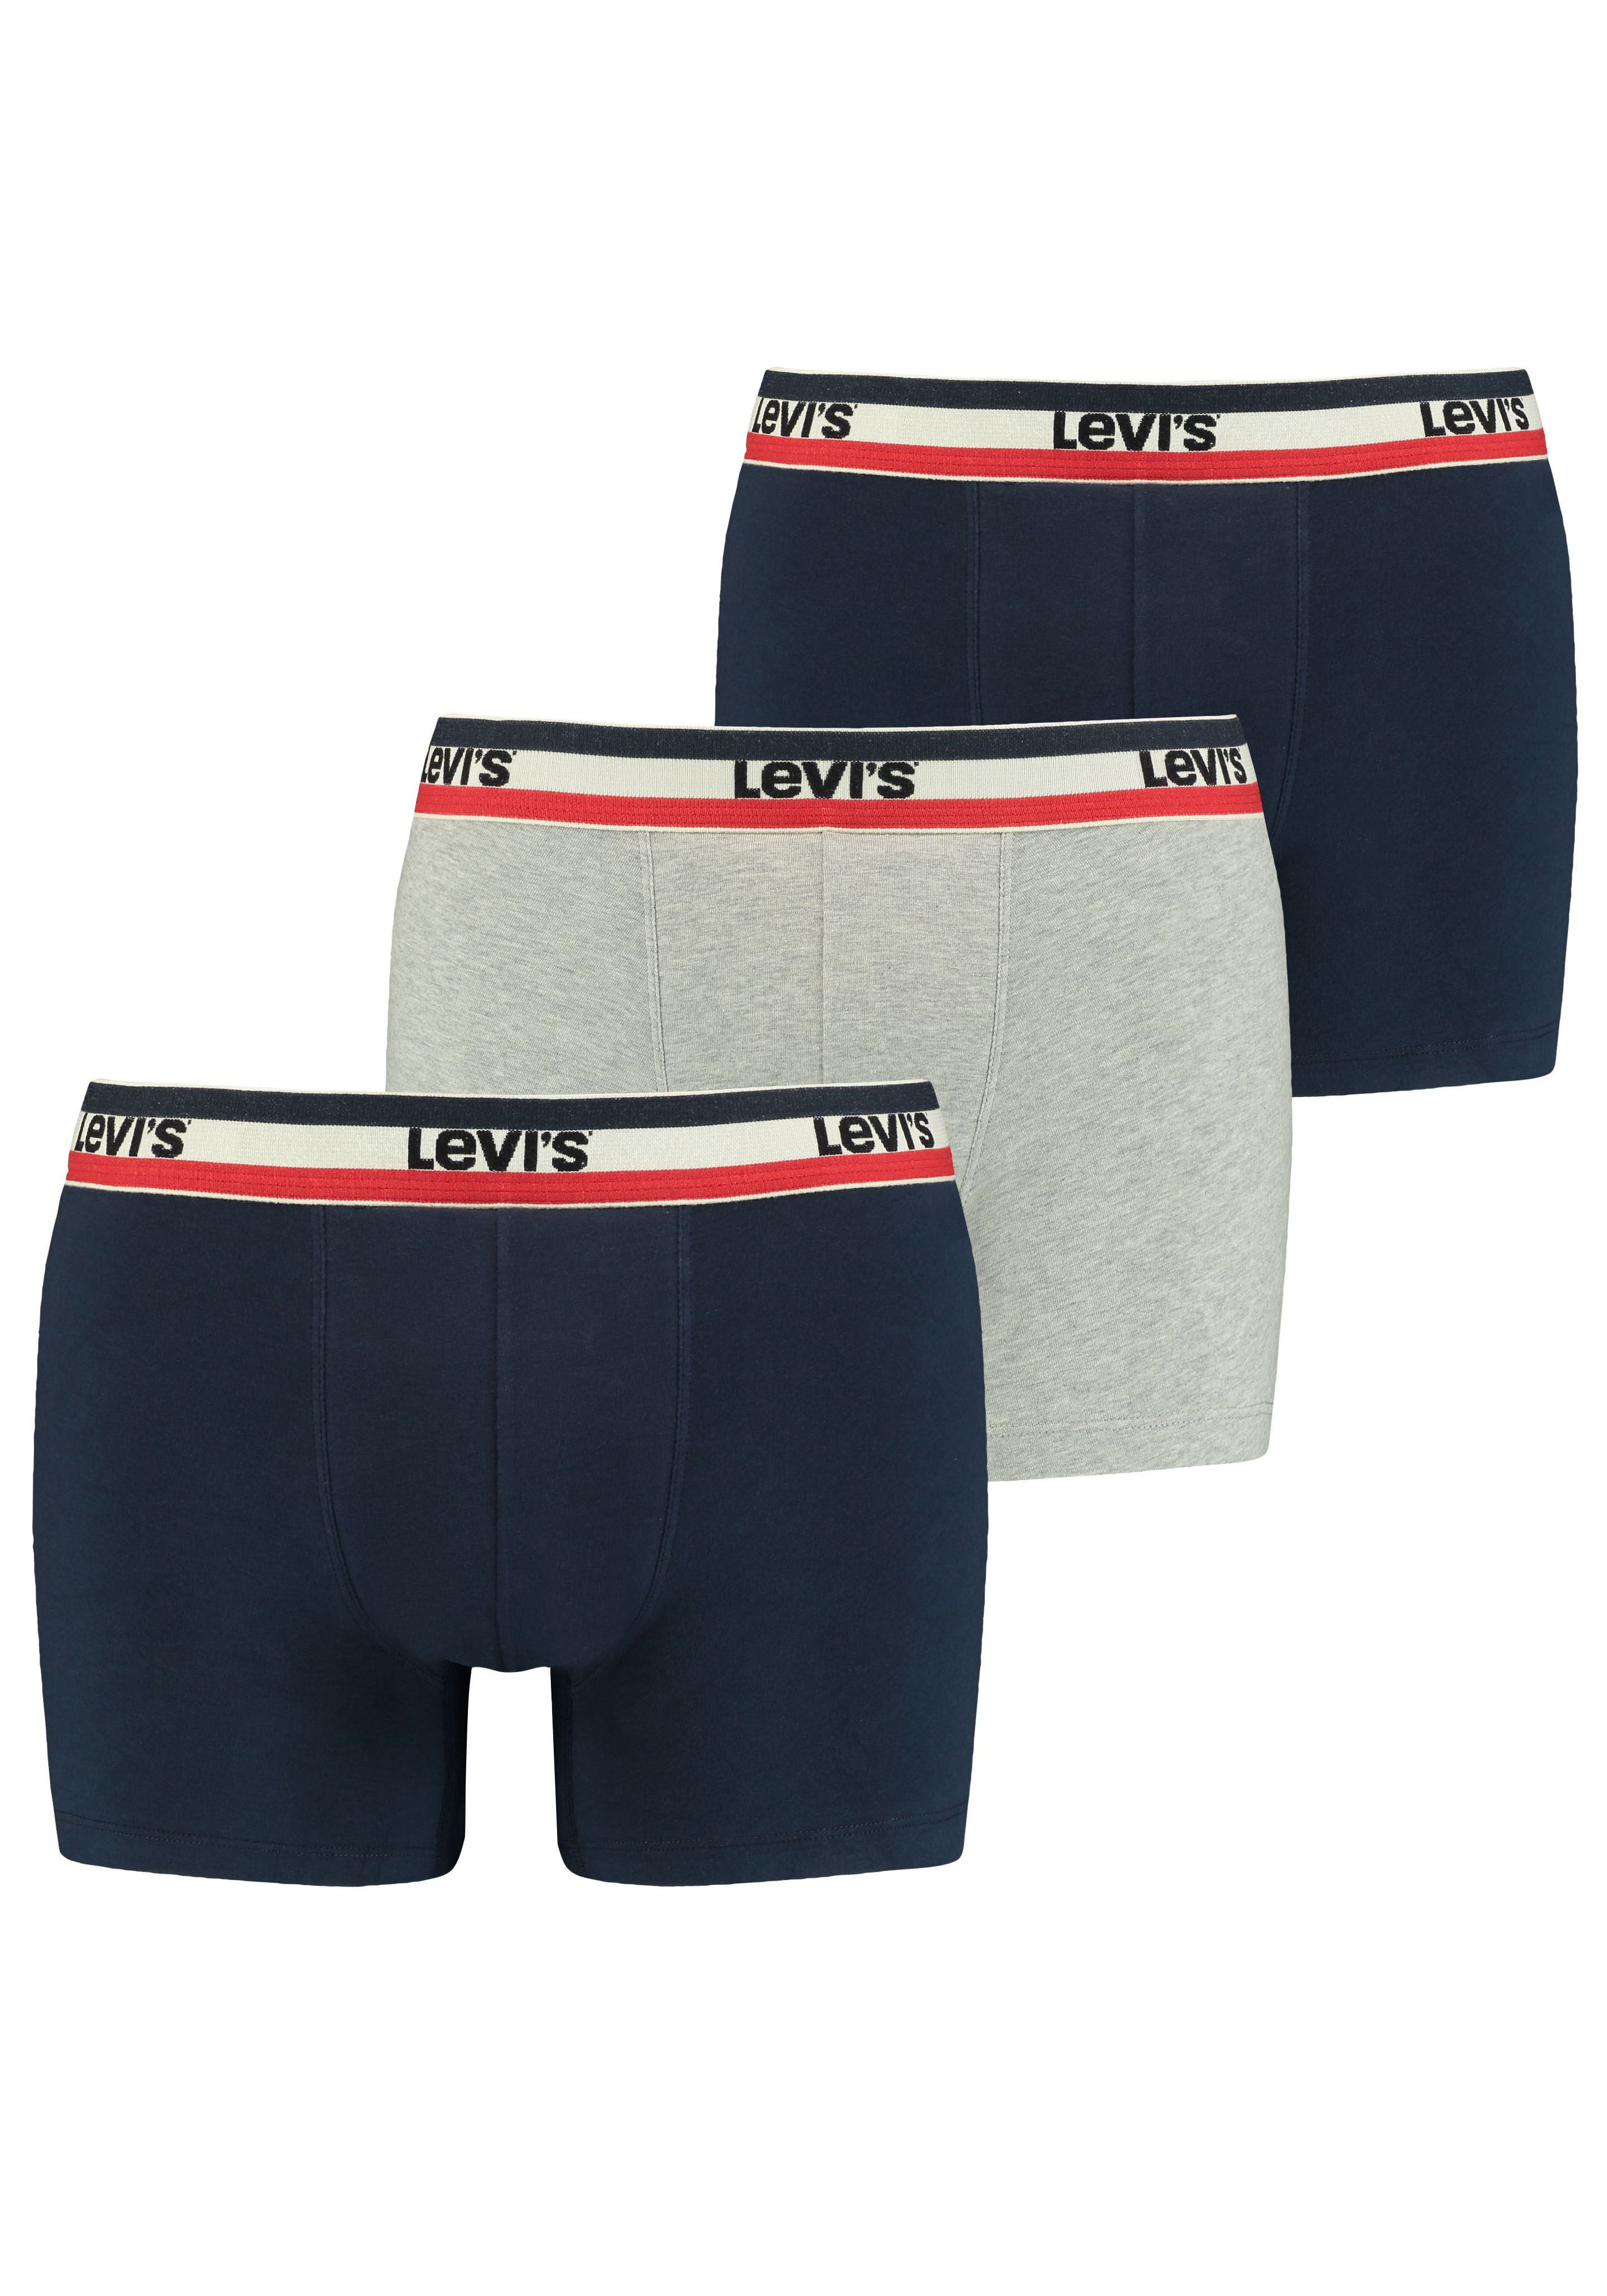 Levis Boxershorts, (Packung, 3 St.)